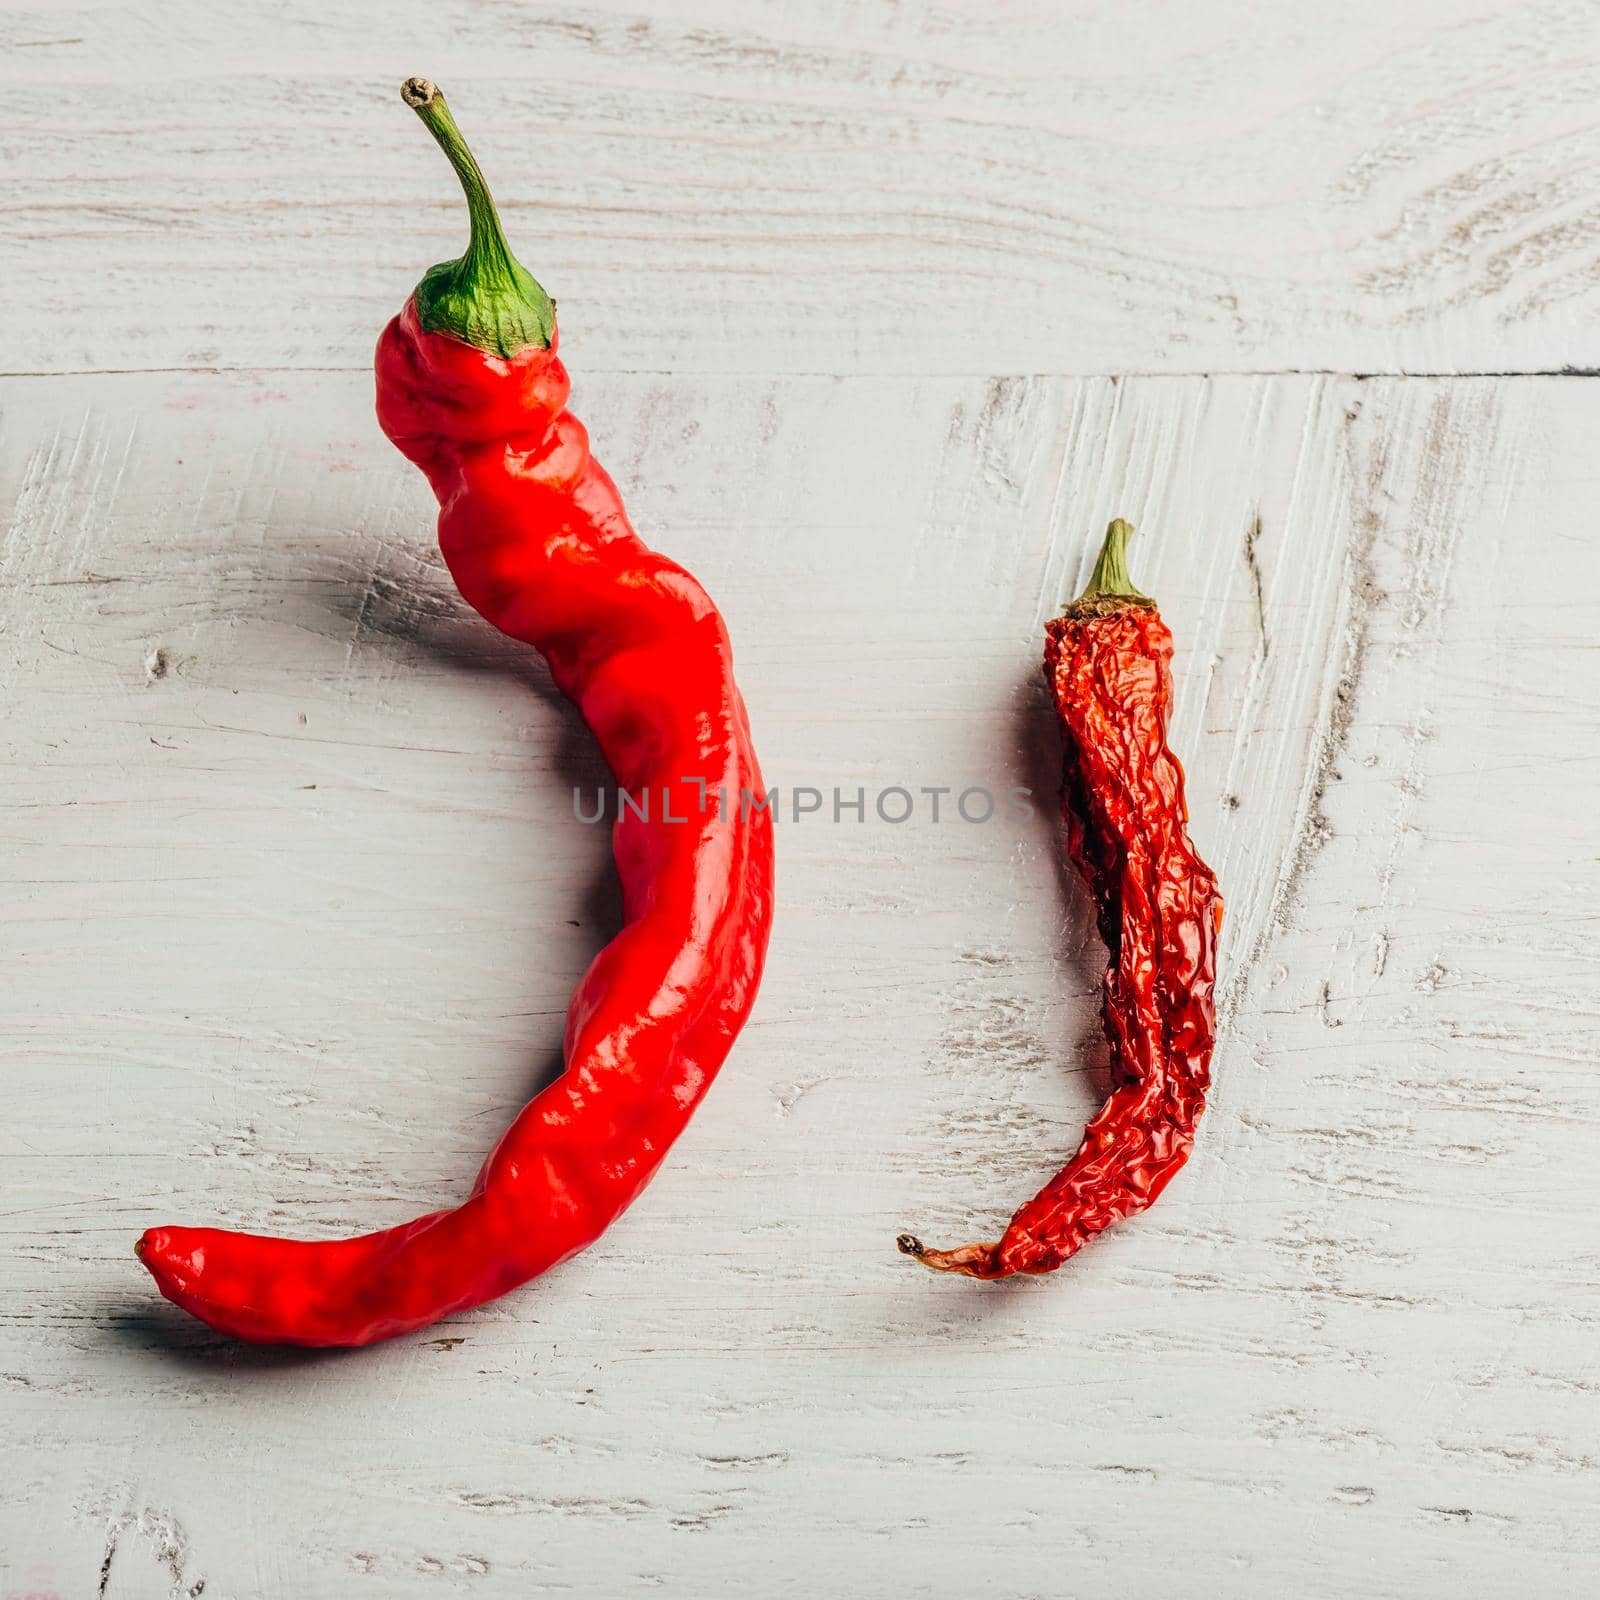 Two red chili peppers, fresh and dry, over wooden background